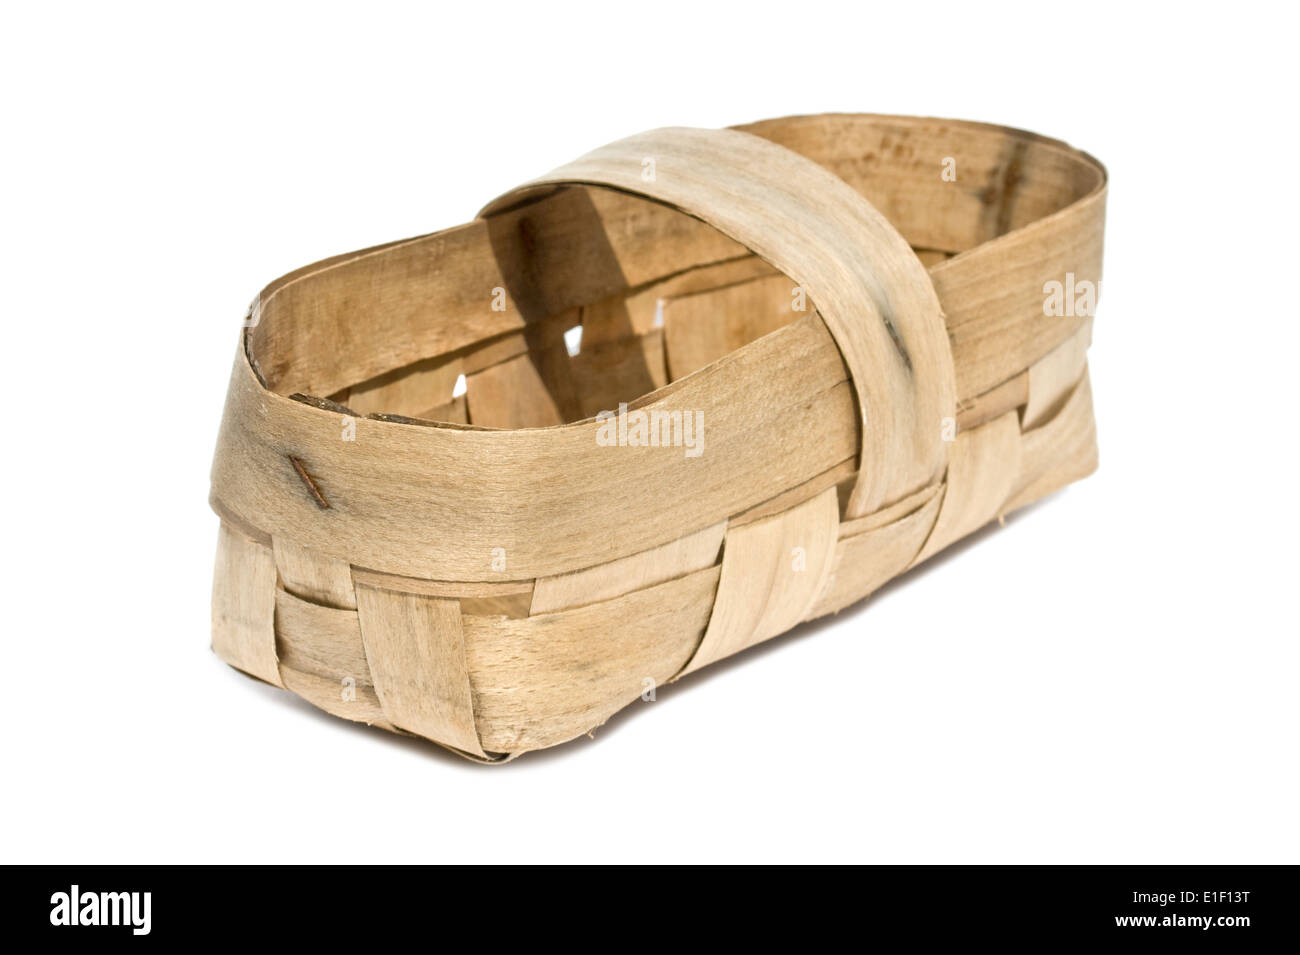 basket woven of birch bark isolated on a white background Stock Photo